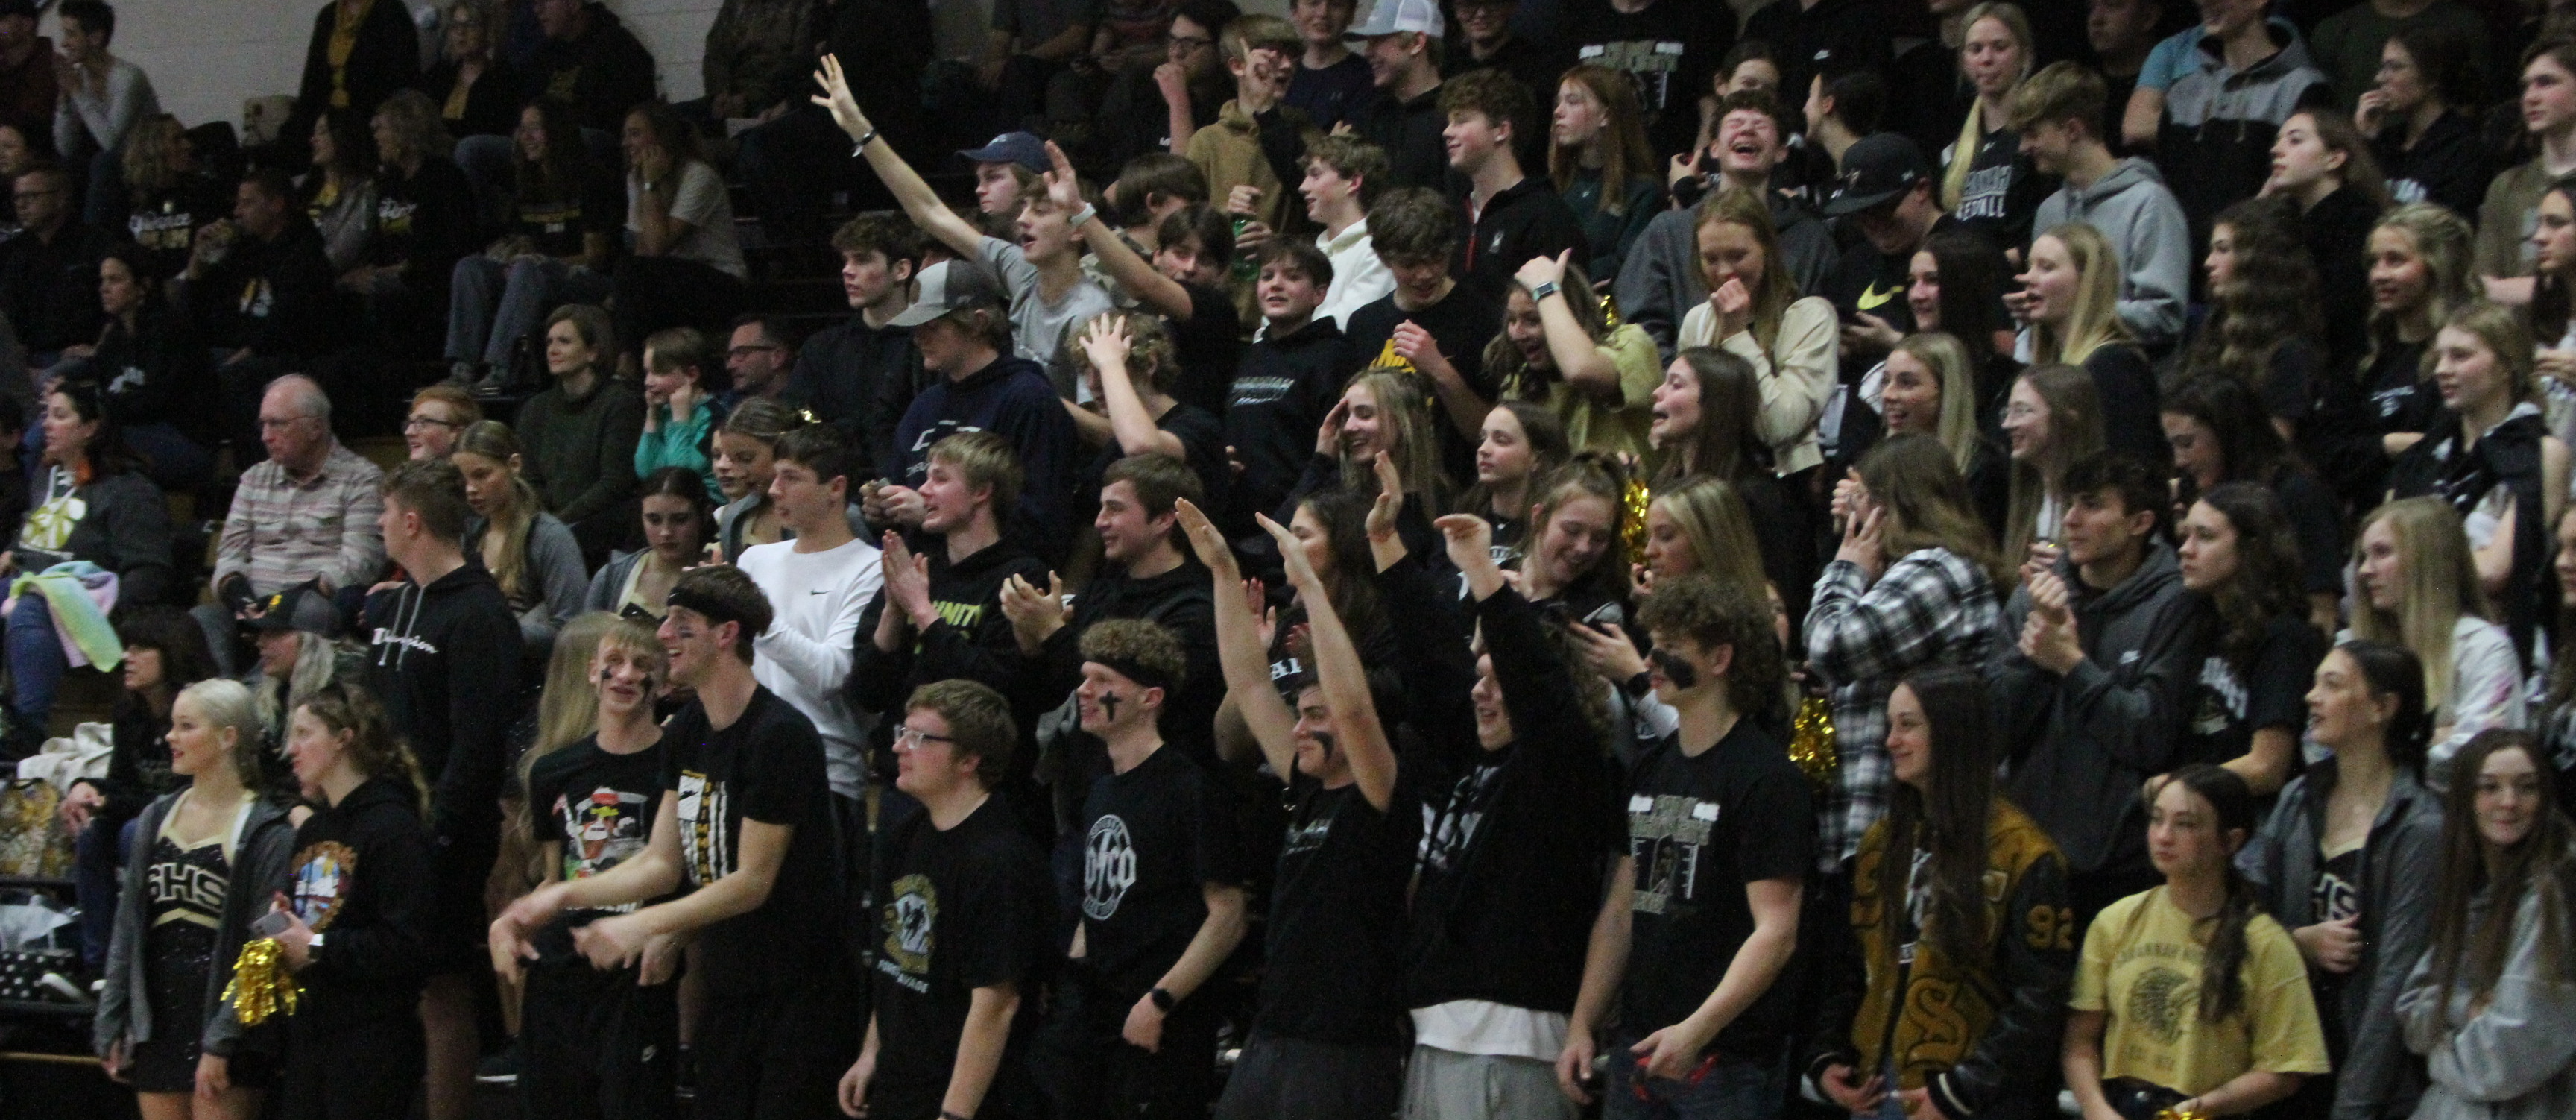 student section